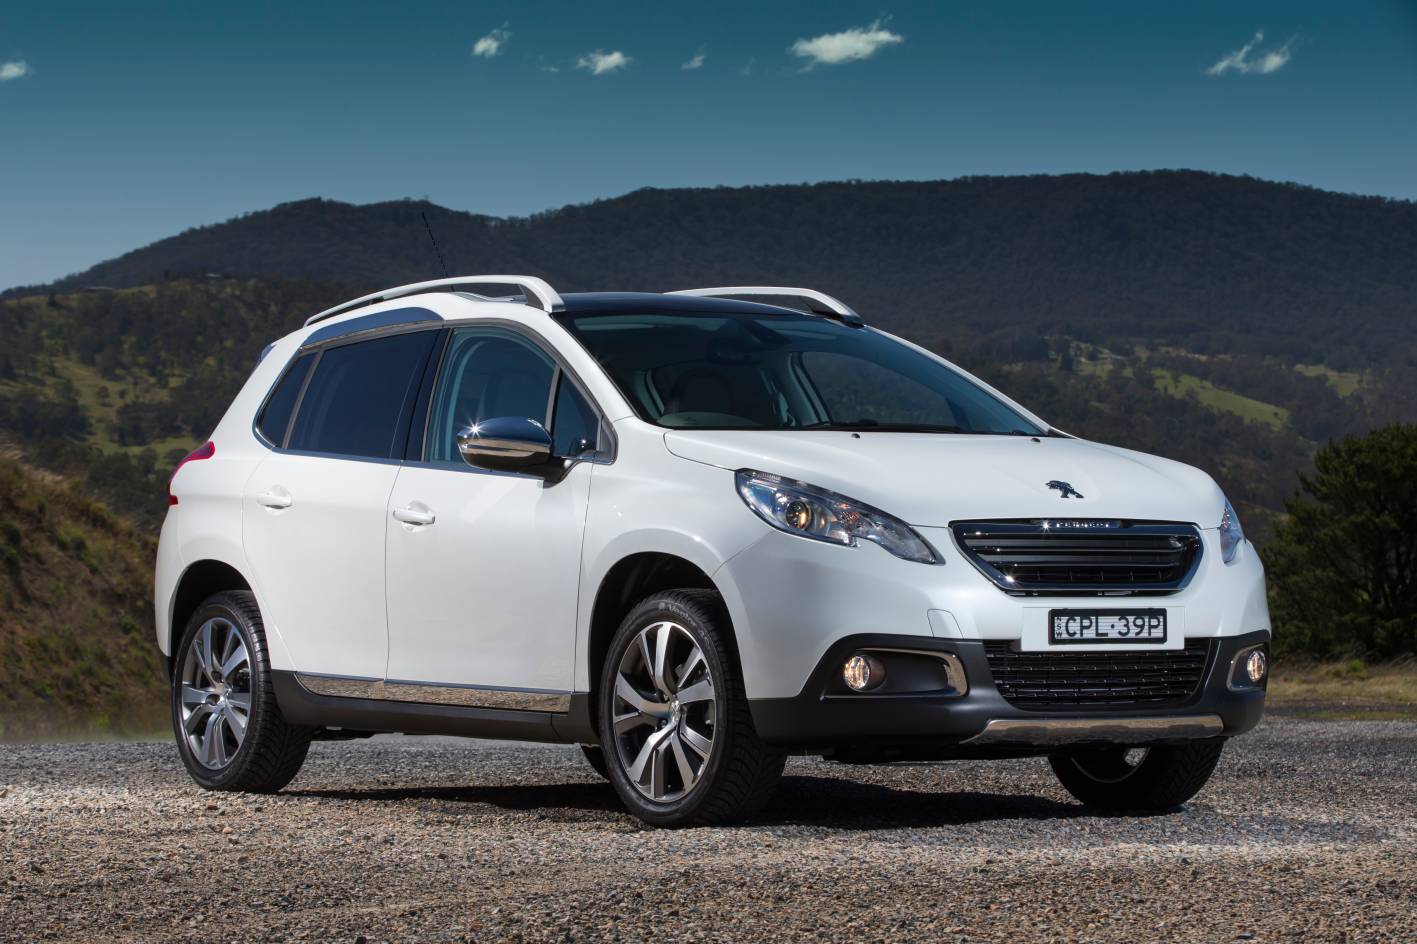 Peugeot Cars News 2008 compact SUV on sale now